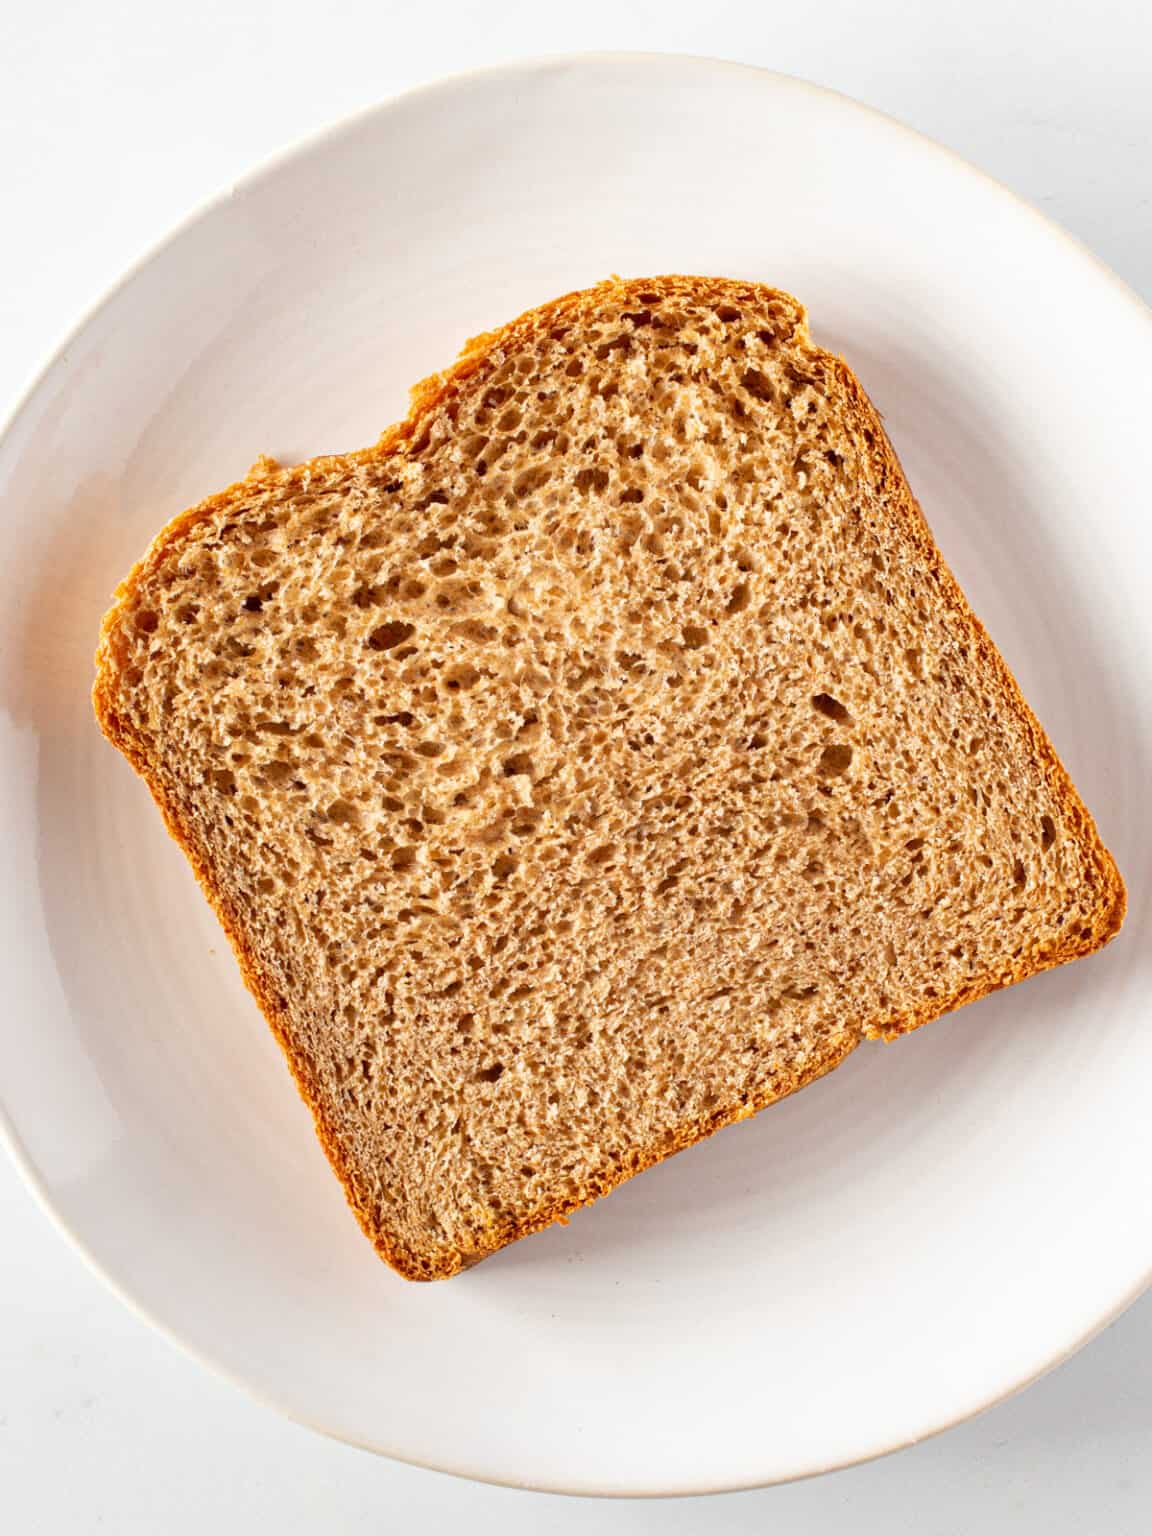 100% Whole Wheat Bread Machine Recipe - Cook Fast, Eat Well